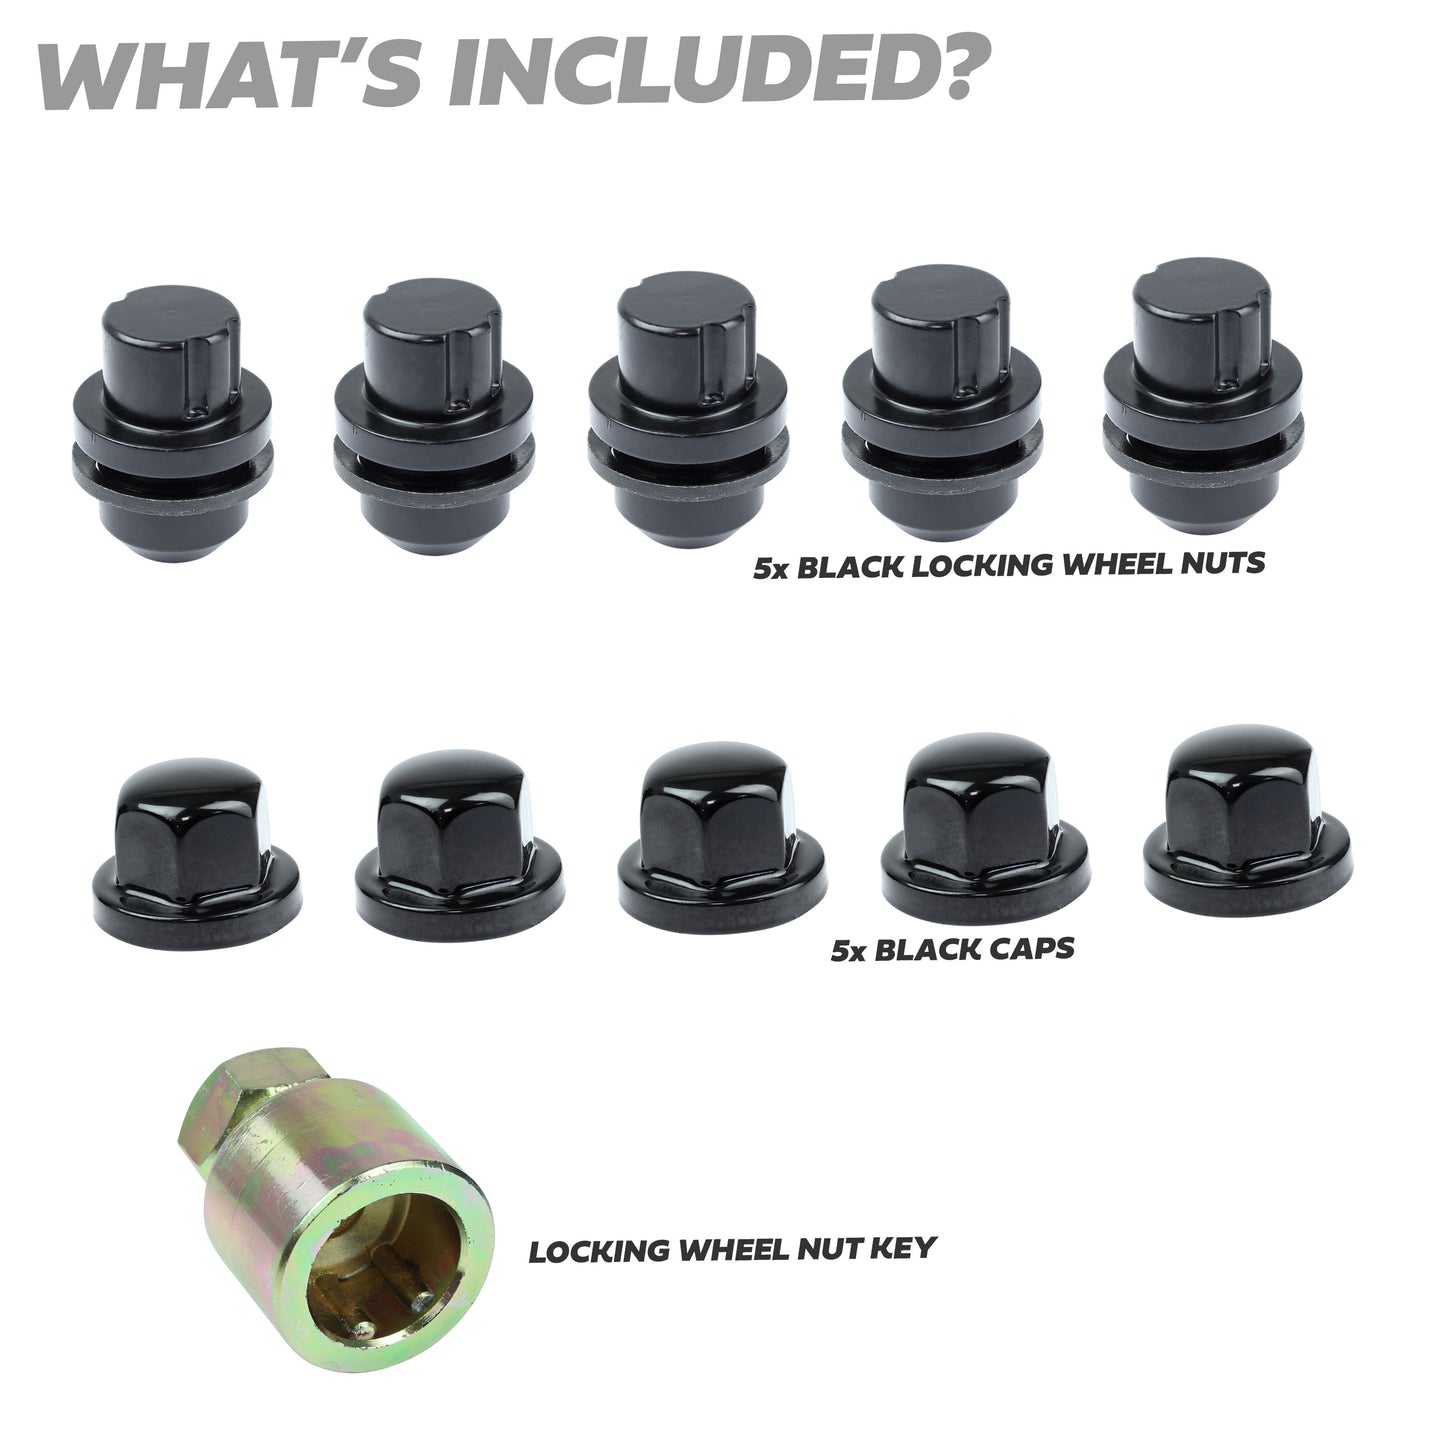 Locking Wheel Nut Kit for Land Rover Discovery 1 Alloy Wheels - Black